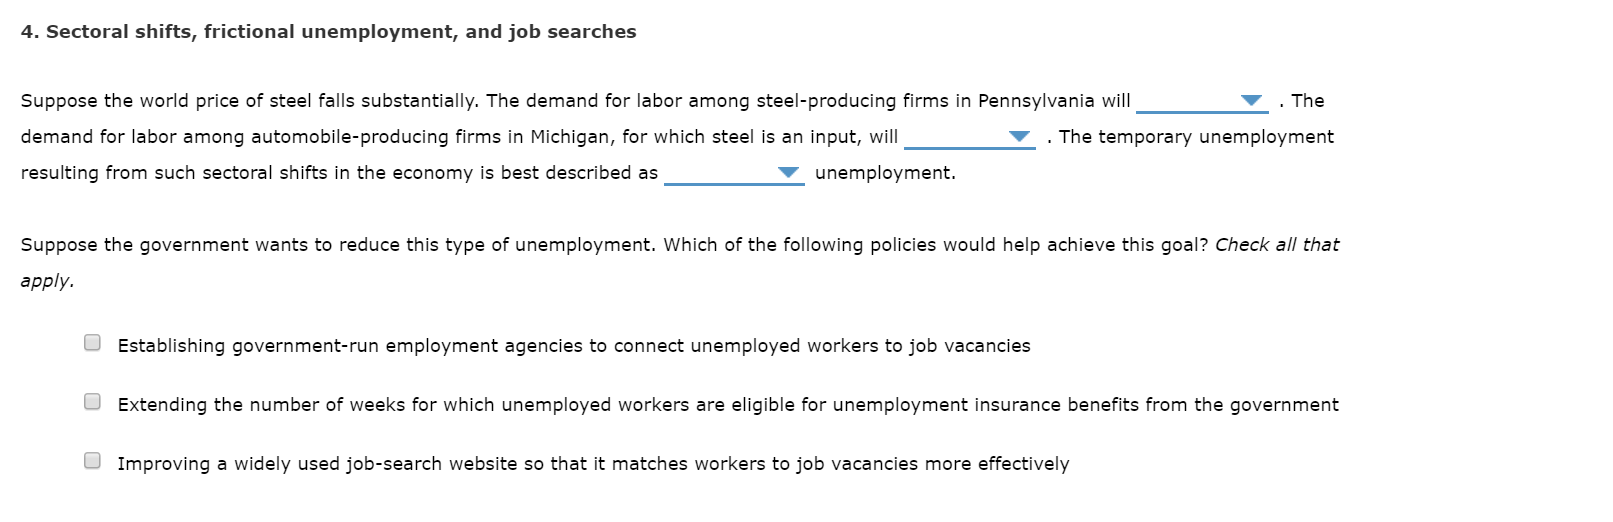 4. Sectoral shifts, frictional unemployment, and job searches
. The
Suppose the world price of steel falls substantially. The demand for labor among steel-producing firms in Pennsylvania will
demand for labor among automobile-producing firms in Michigan, for which steel is an input, will
The temporary unemployment
unemployment.
resulting from such sectoral shifts in the economy is best described as
Suppose the government wants to reduce this type of unemployment. Which of the following policies would help achieve this goal? Check all that
apply.
O Establishing government-run employment agencies to connect unemployed workers to job vacancies
O Extending the number of weeks for which unemployed workers are eligible for unemployment insurance benefits from the government
O Improving a widely used job-search website so that it matches workers to job vacancies more effectively
